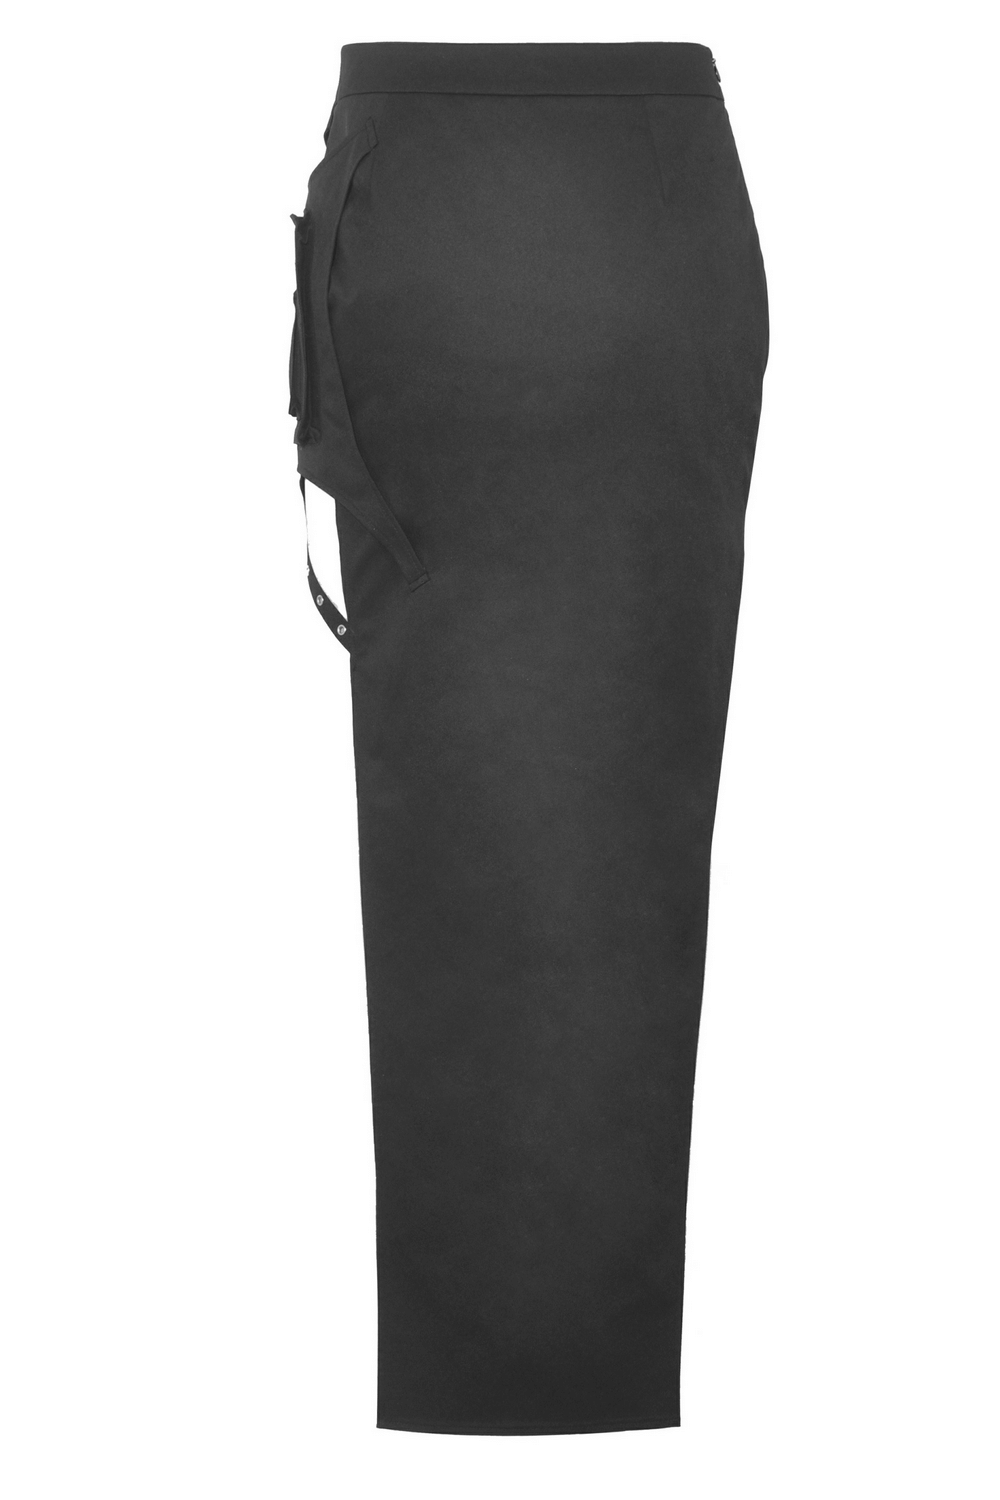 Edgy Black Skirt with Buckle Details and Side Slits